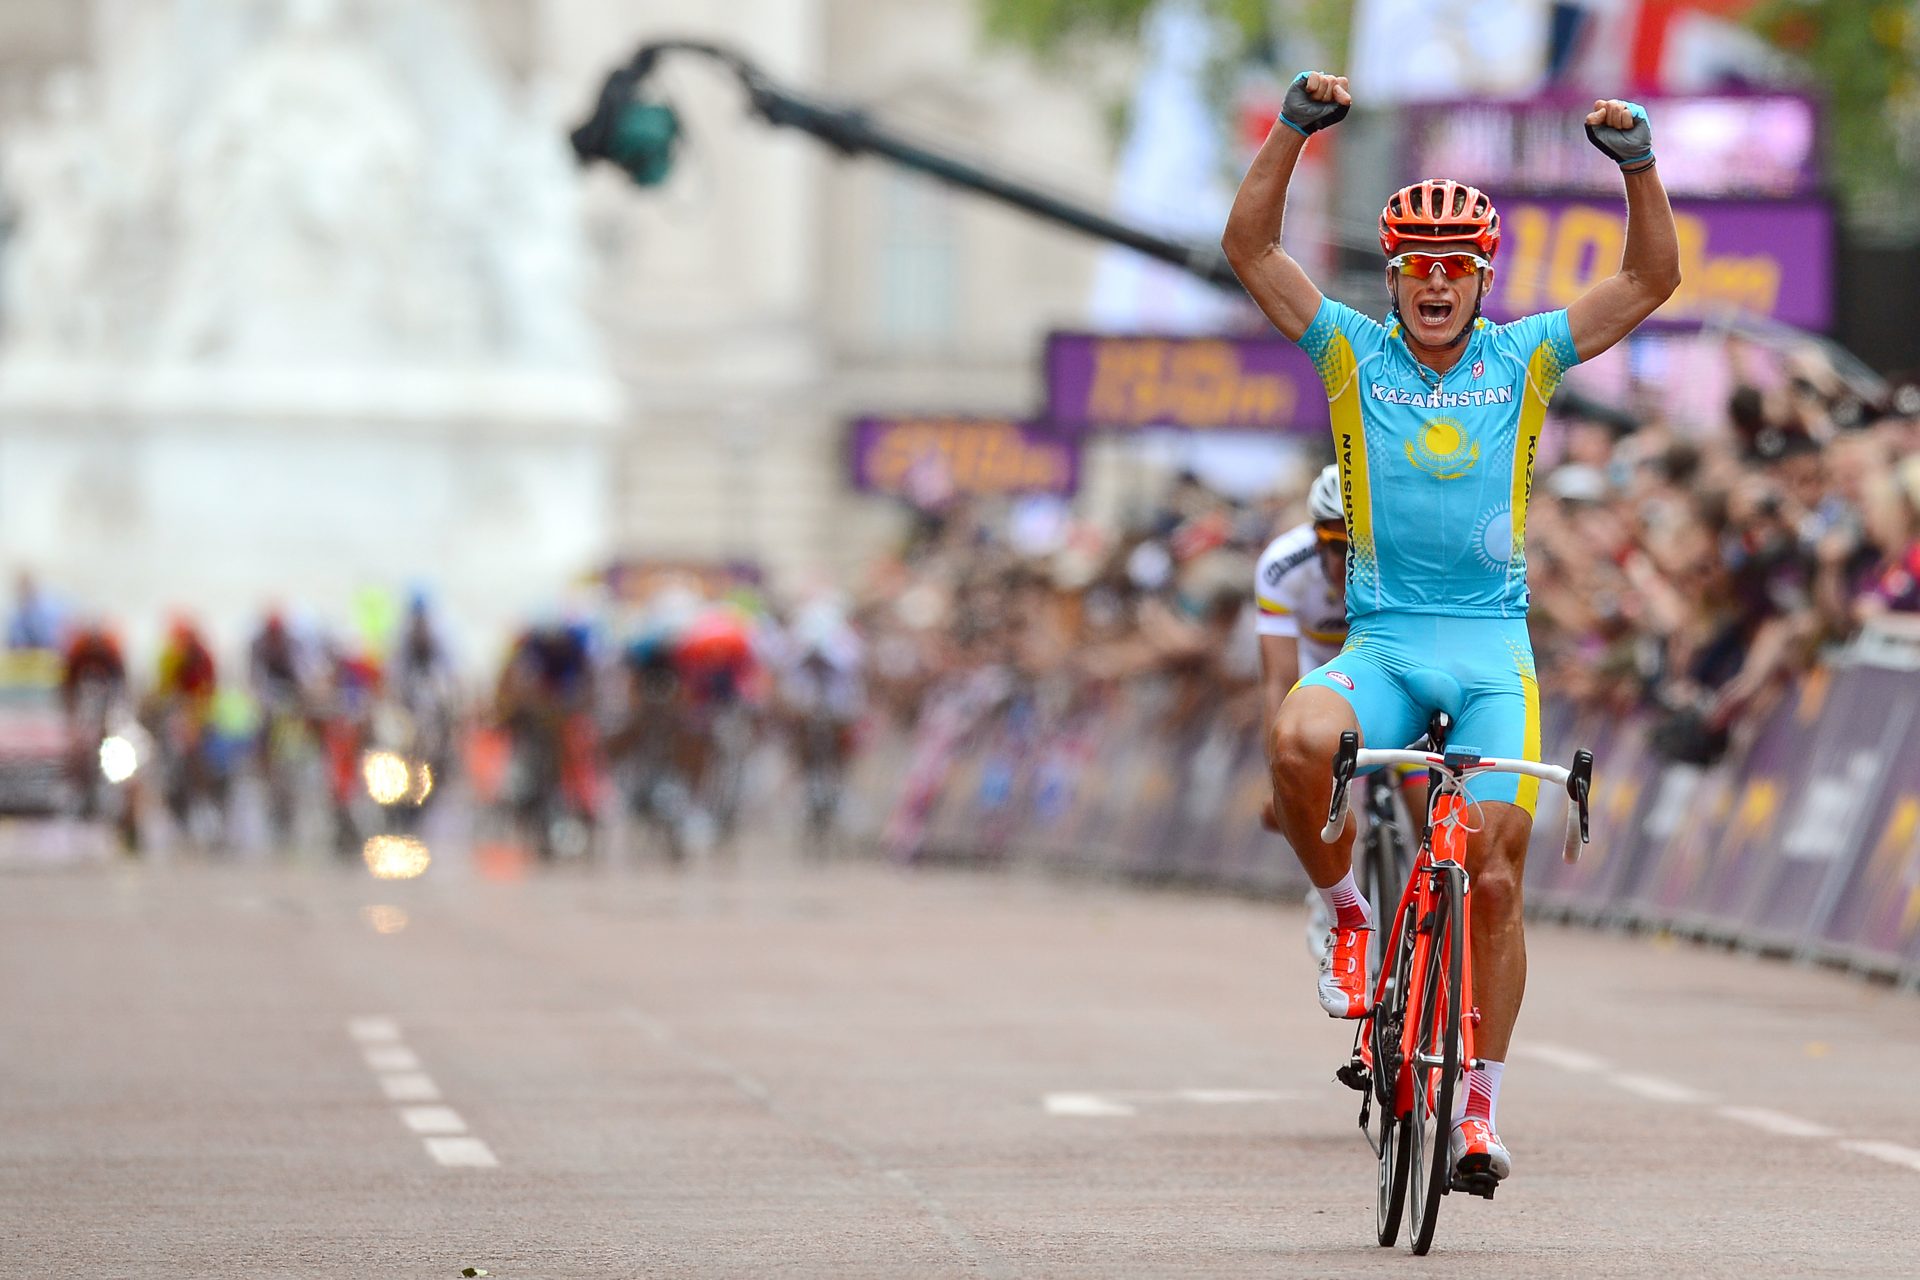 Alexander Vinokourov, the most controversial rider in the history of cycling?